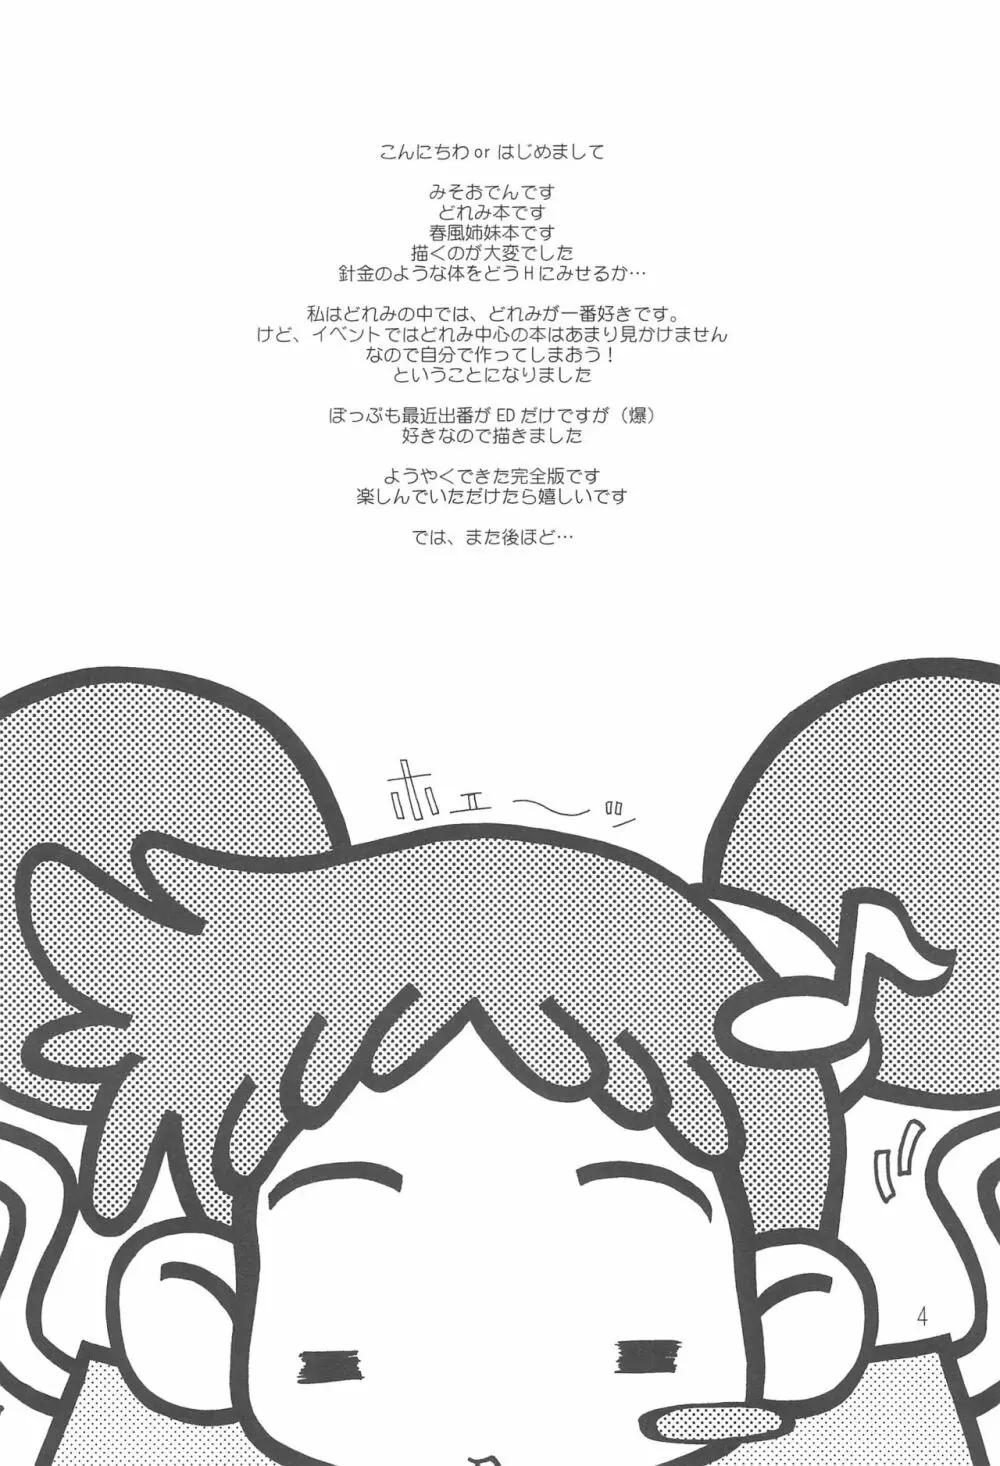 CDE 完全版 - page6